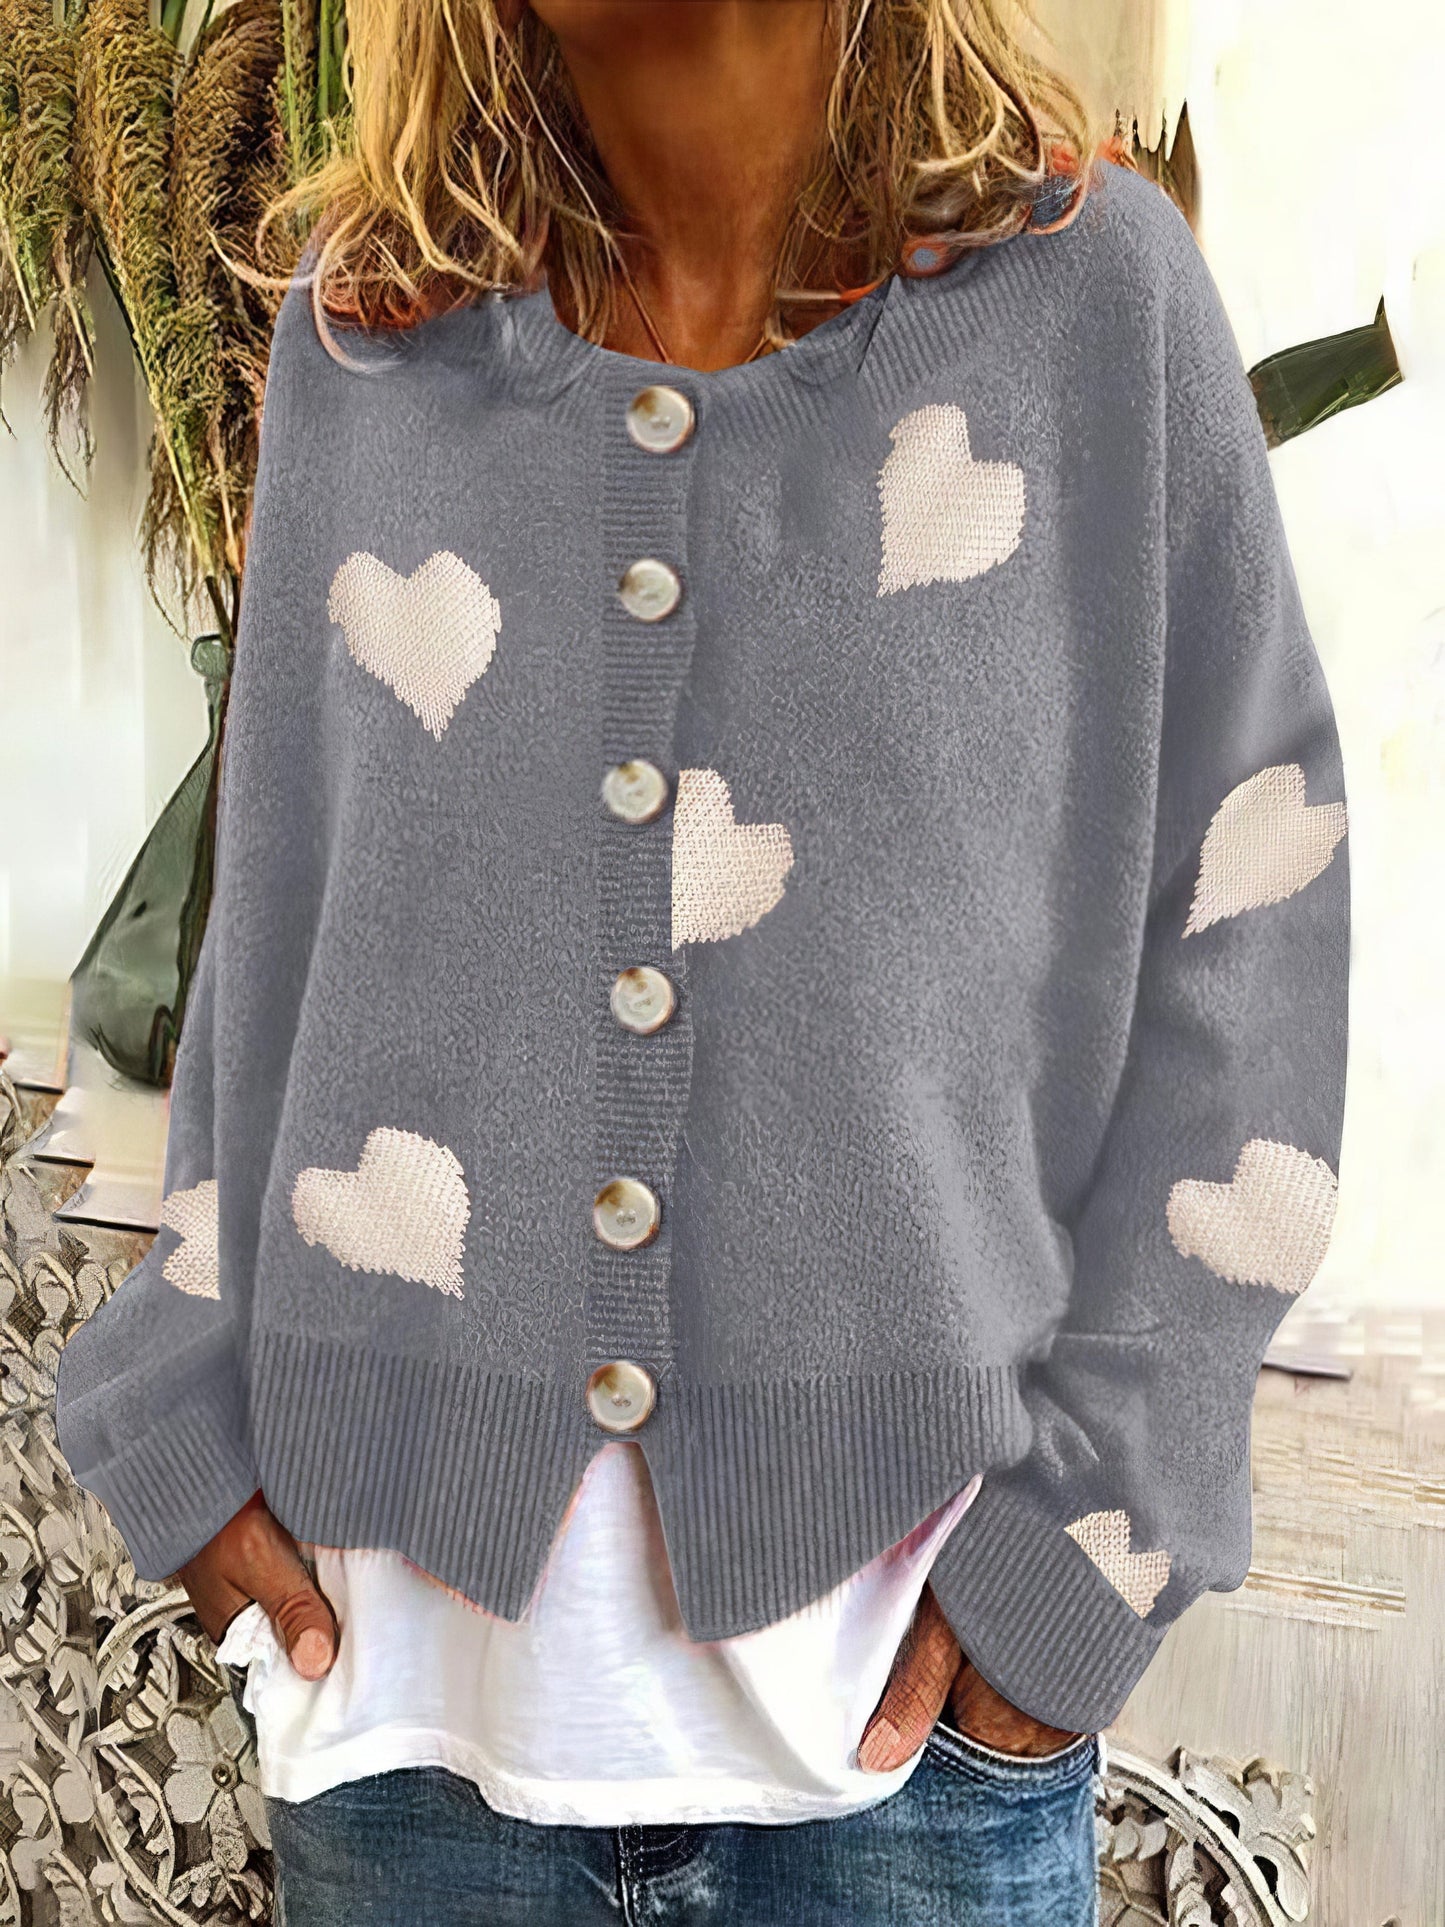 Knit Single-Breasted Heart Cardigan Sweater -Bishop - Barcelet - Closed - Scoop - Jewel SWE2109181183GRES Gray / 2 (S)